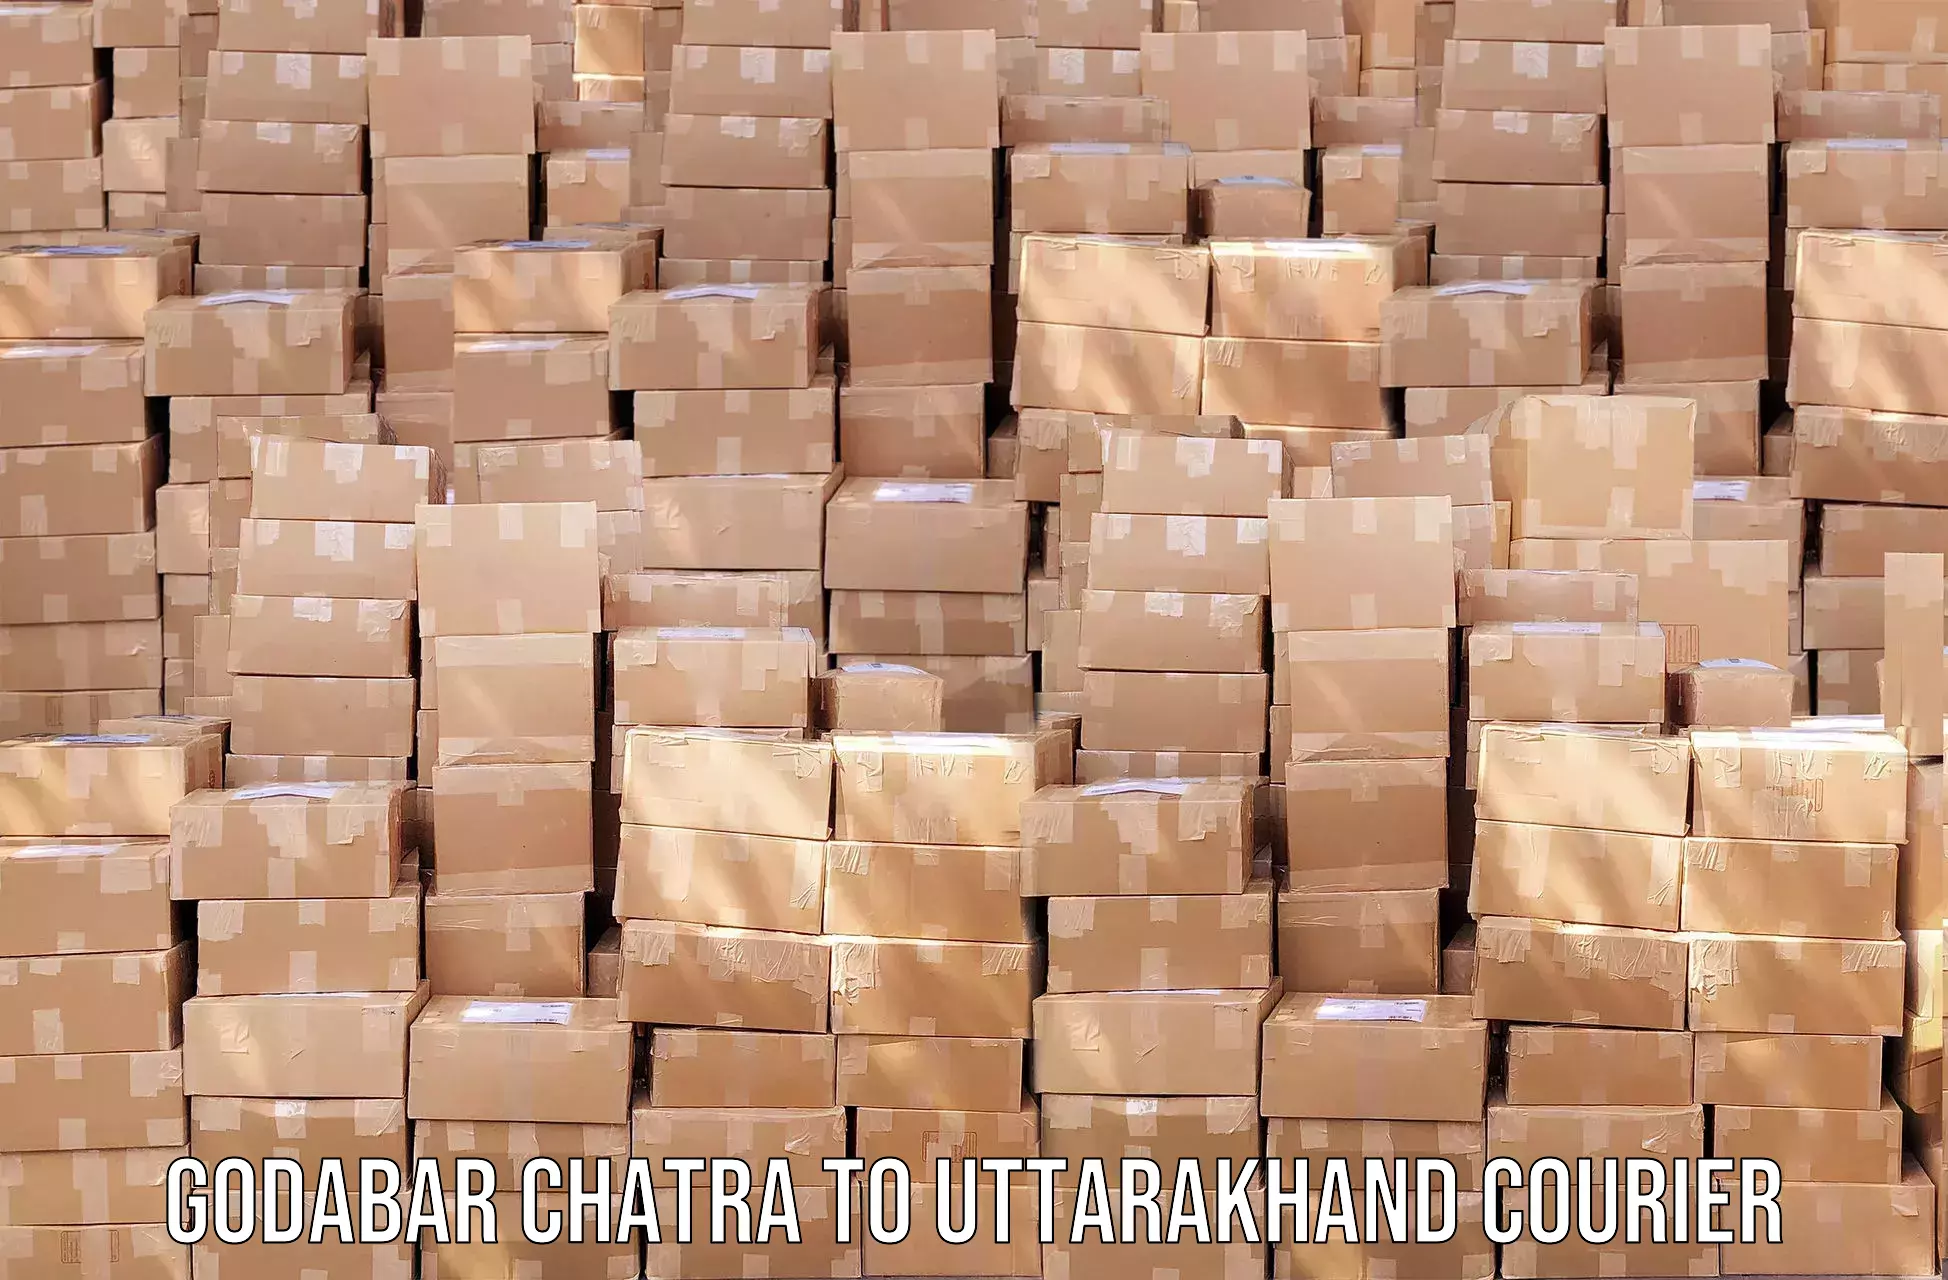 Professional courier handling in Godabar Chatra to Kashipur